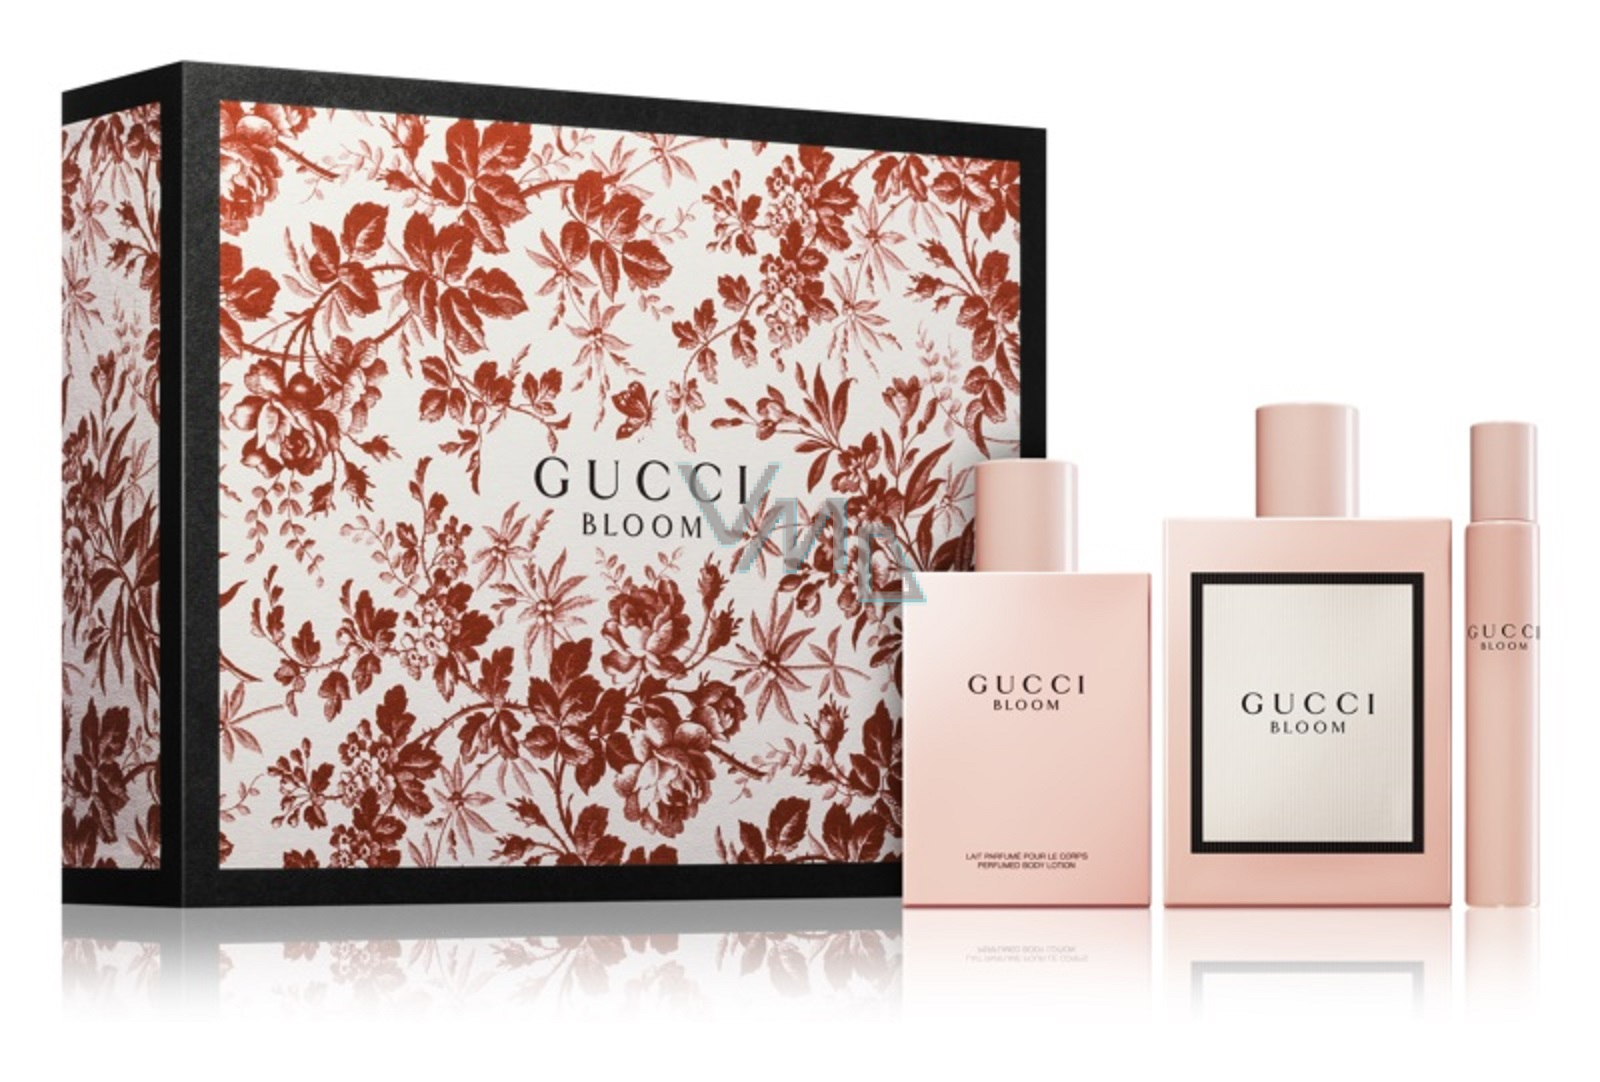 Gucci Bloom perfumed water for 100 ml + body lotion 100 ml + perfumed water 7.4 ml, gift box - VMD parfumerie - drogerie